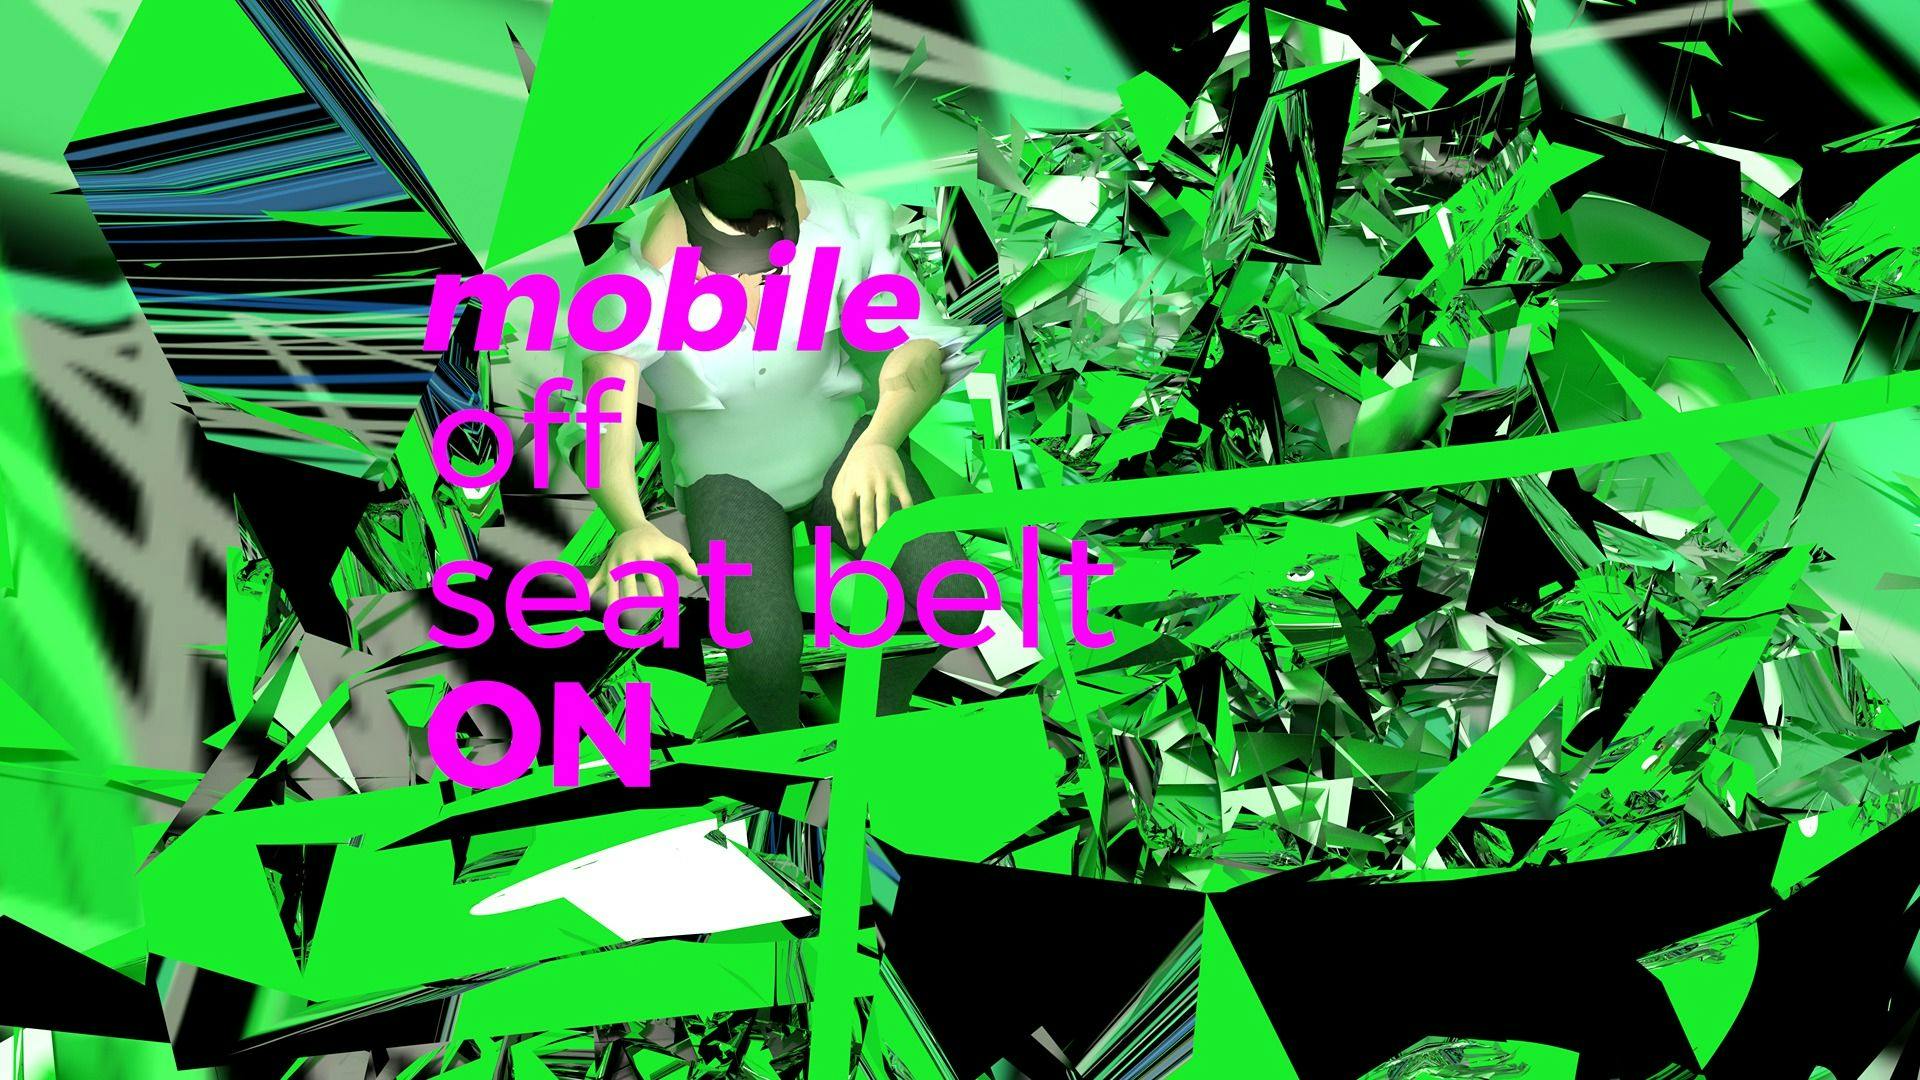 a still image of the video The highway is like a lion's mouth. Pink text that says mobile off seat belt ON float above a figure wearing a balaclava. The background is composed of green shapes. The image is a digital animation